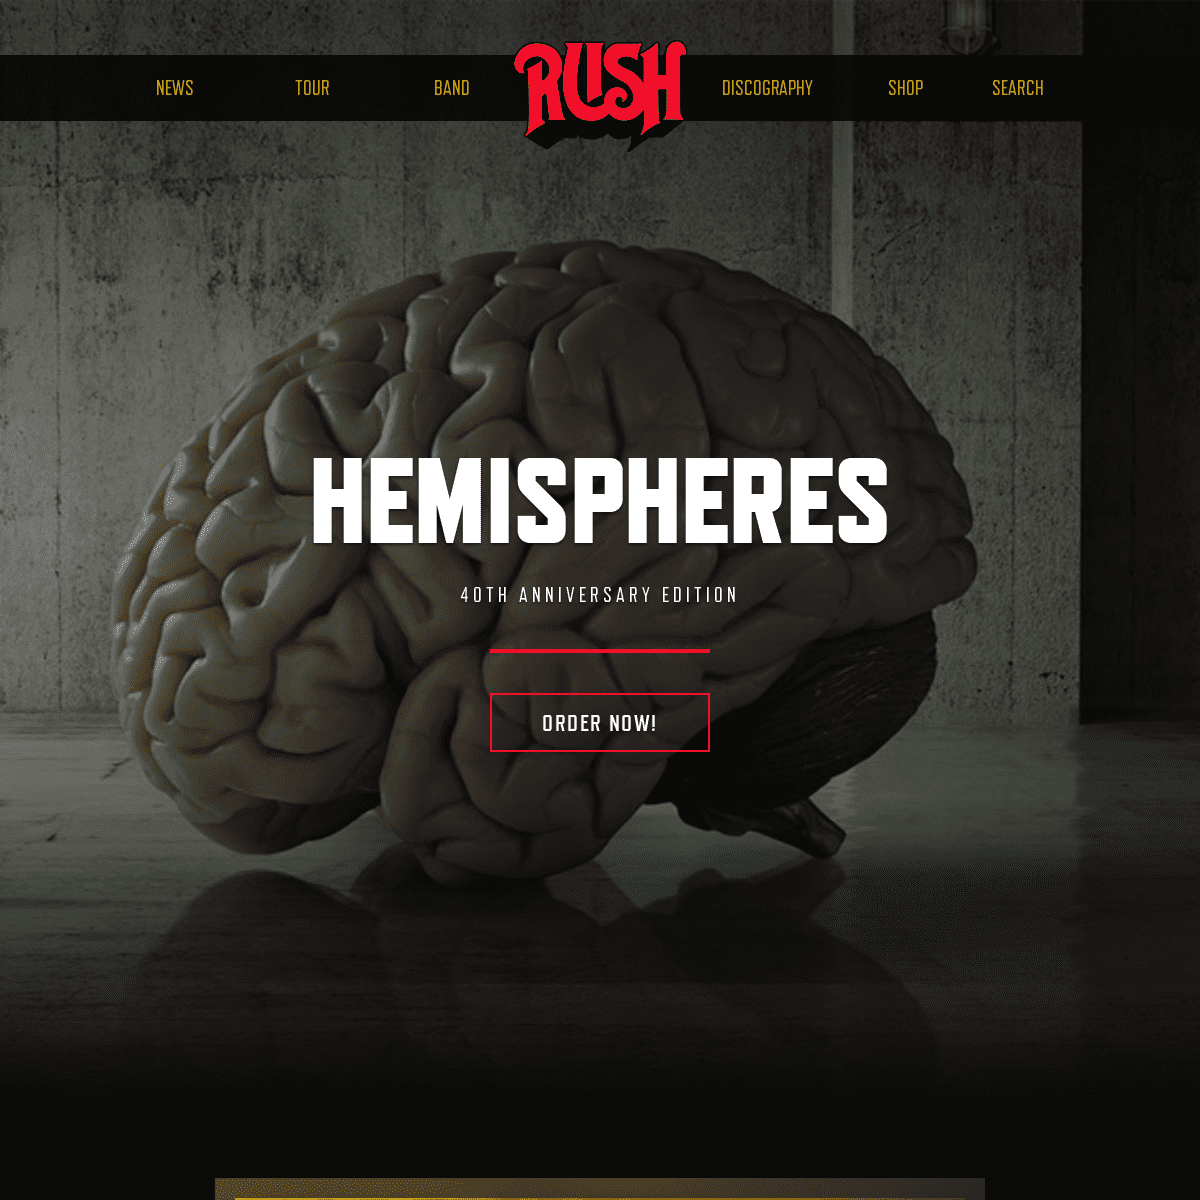 Rush.com | Official News and Information about the Legendary Rock Band Rush